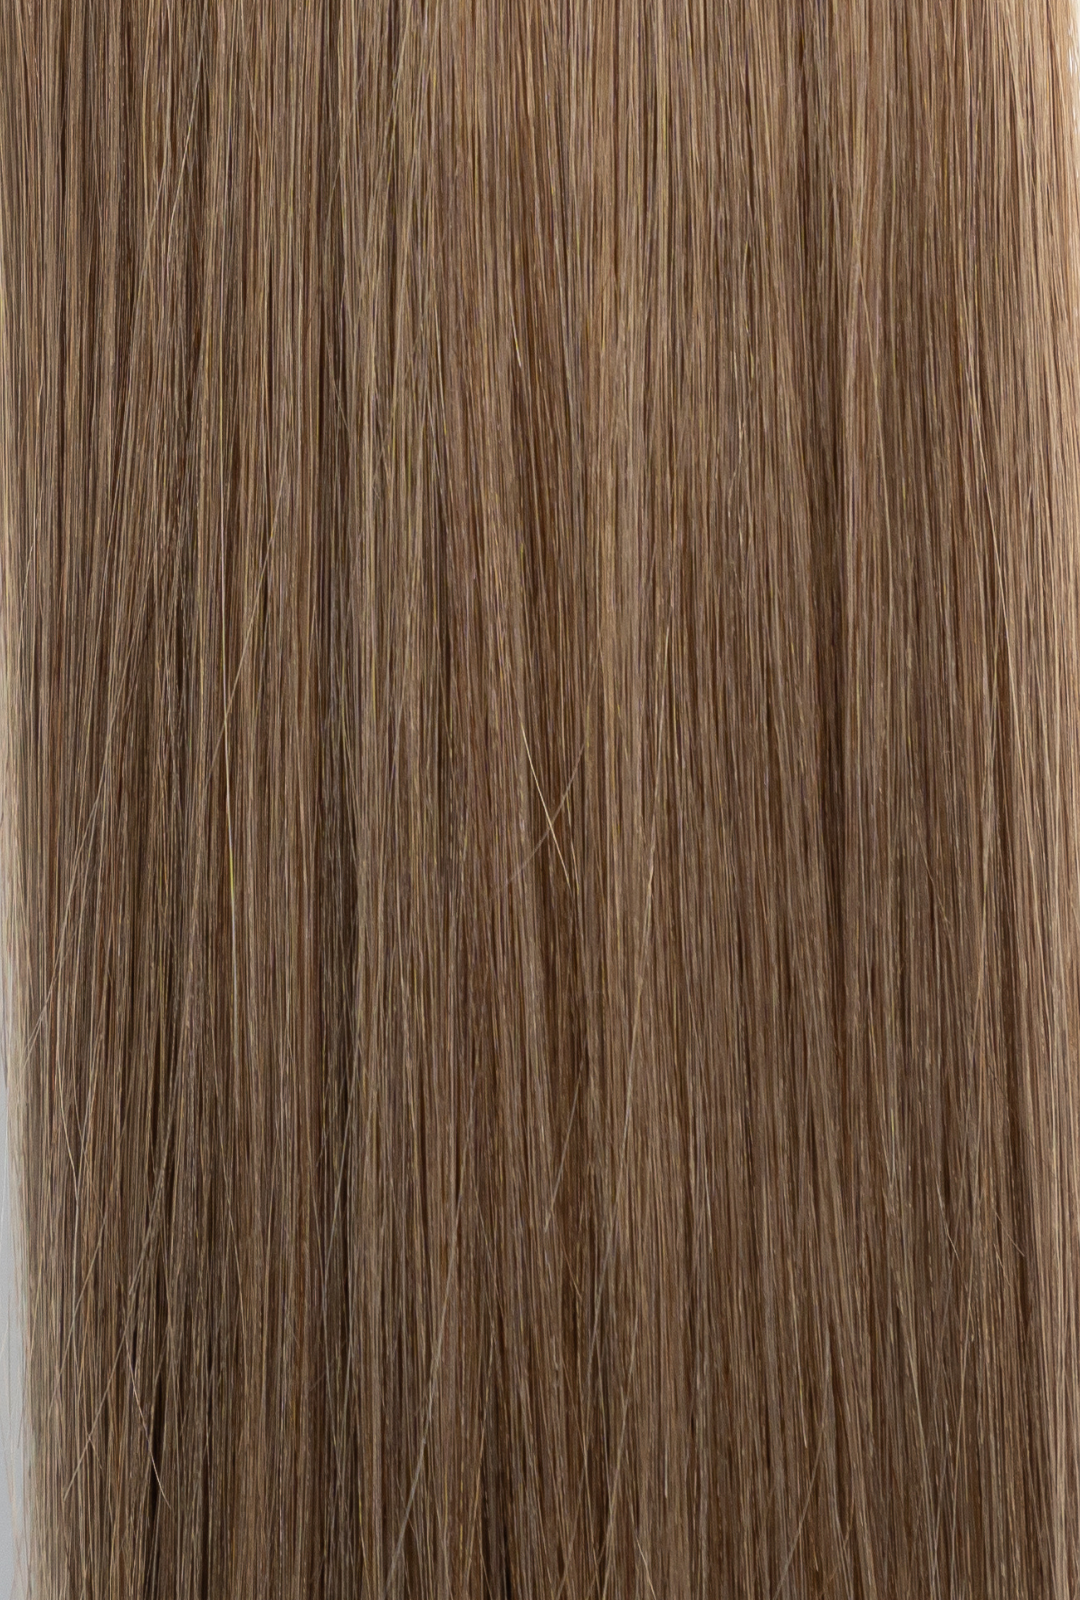 Laced Hair Machine Sewn Weft Extensions #8